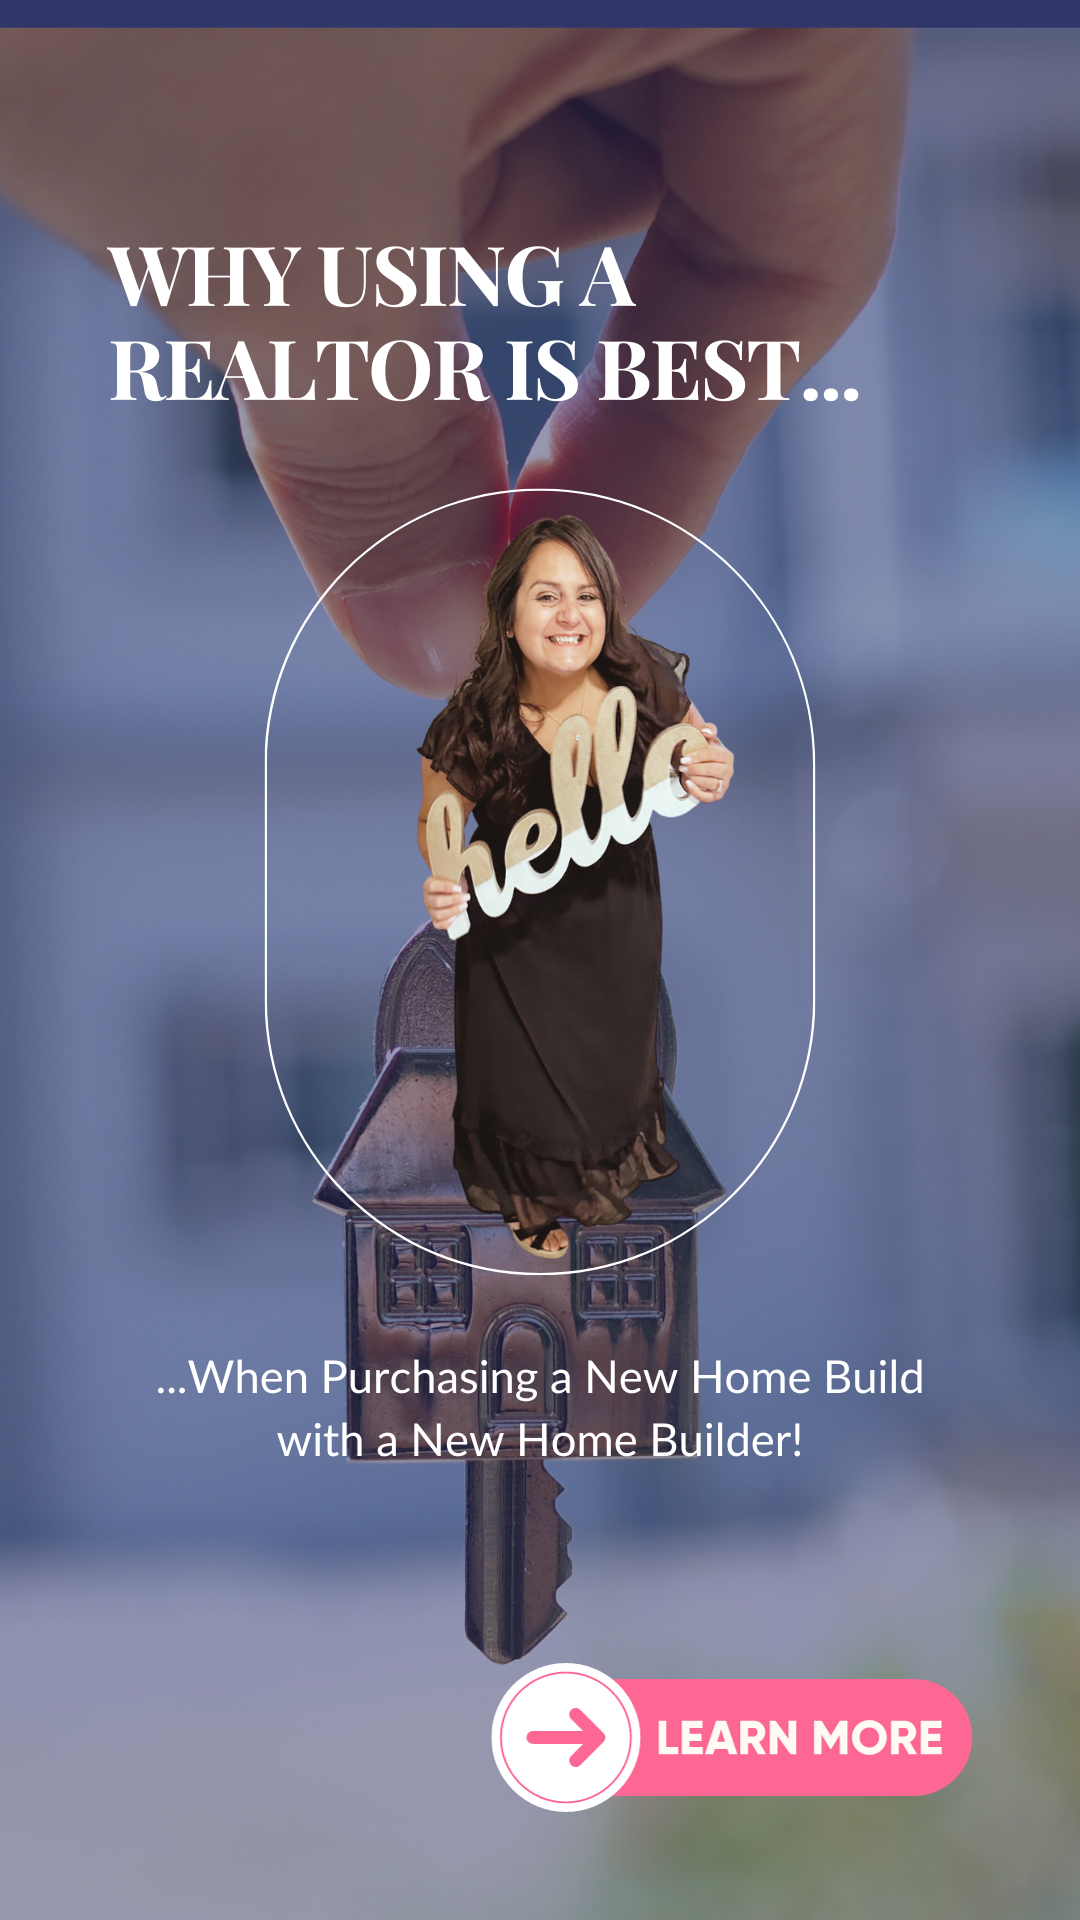 Why Using a Realtor Is Best When Purchasing a New Home